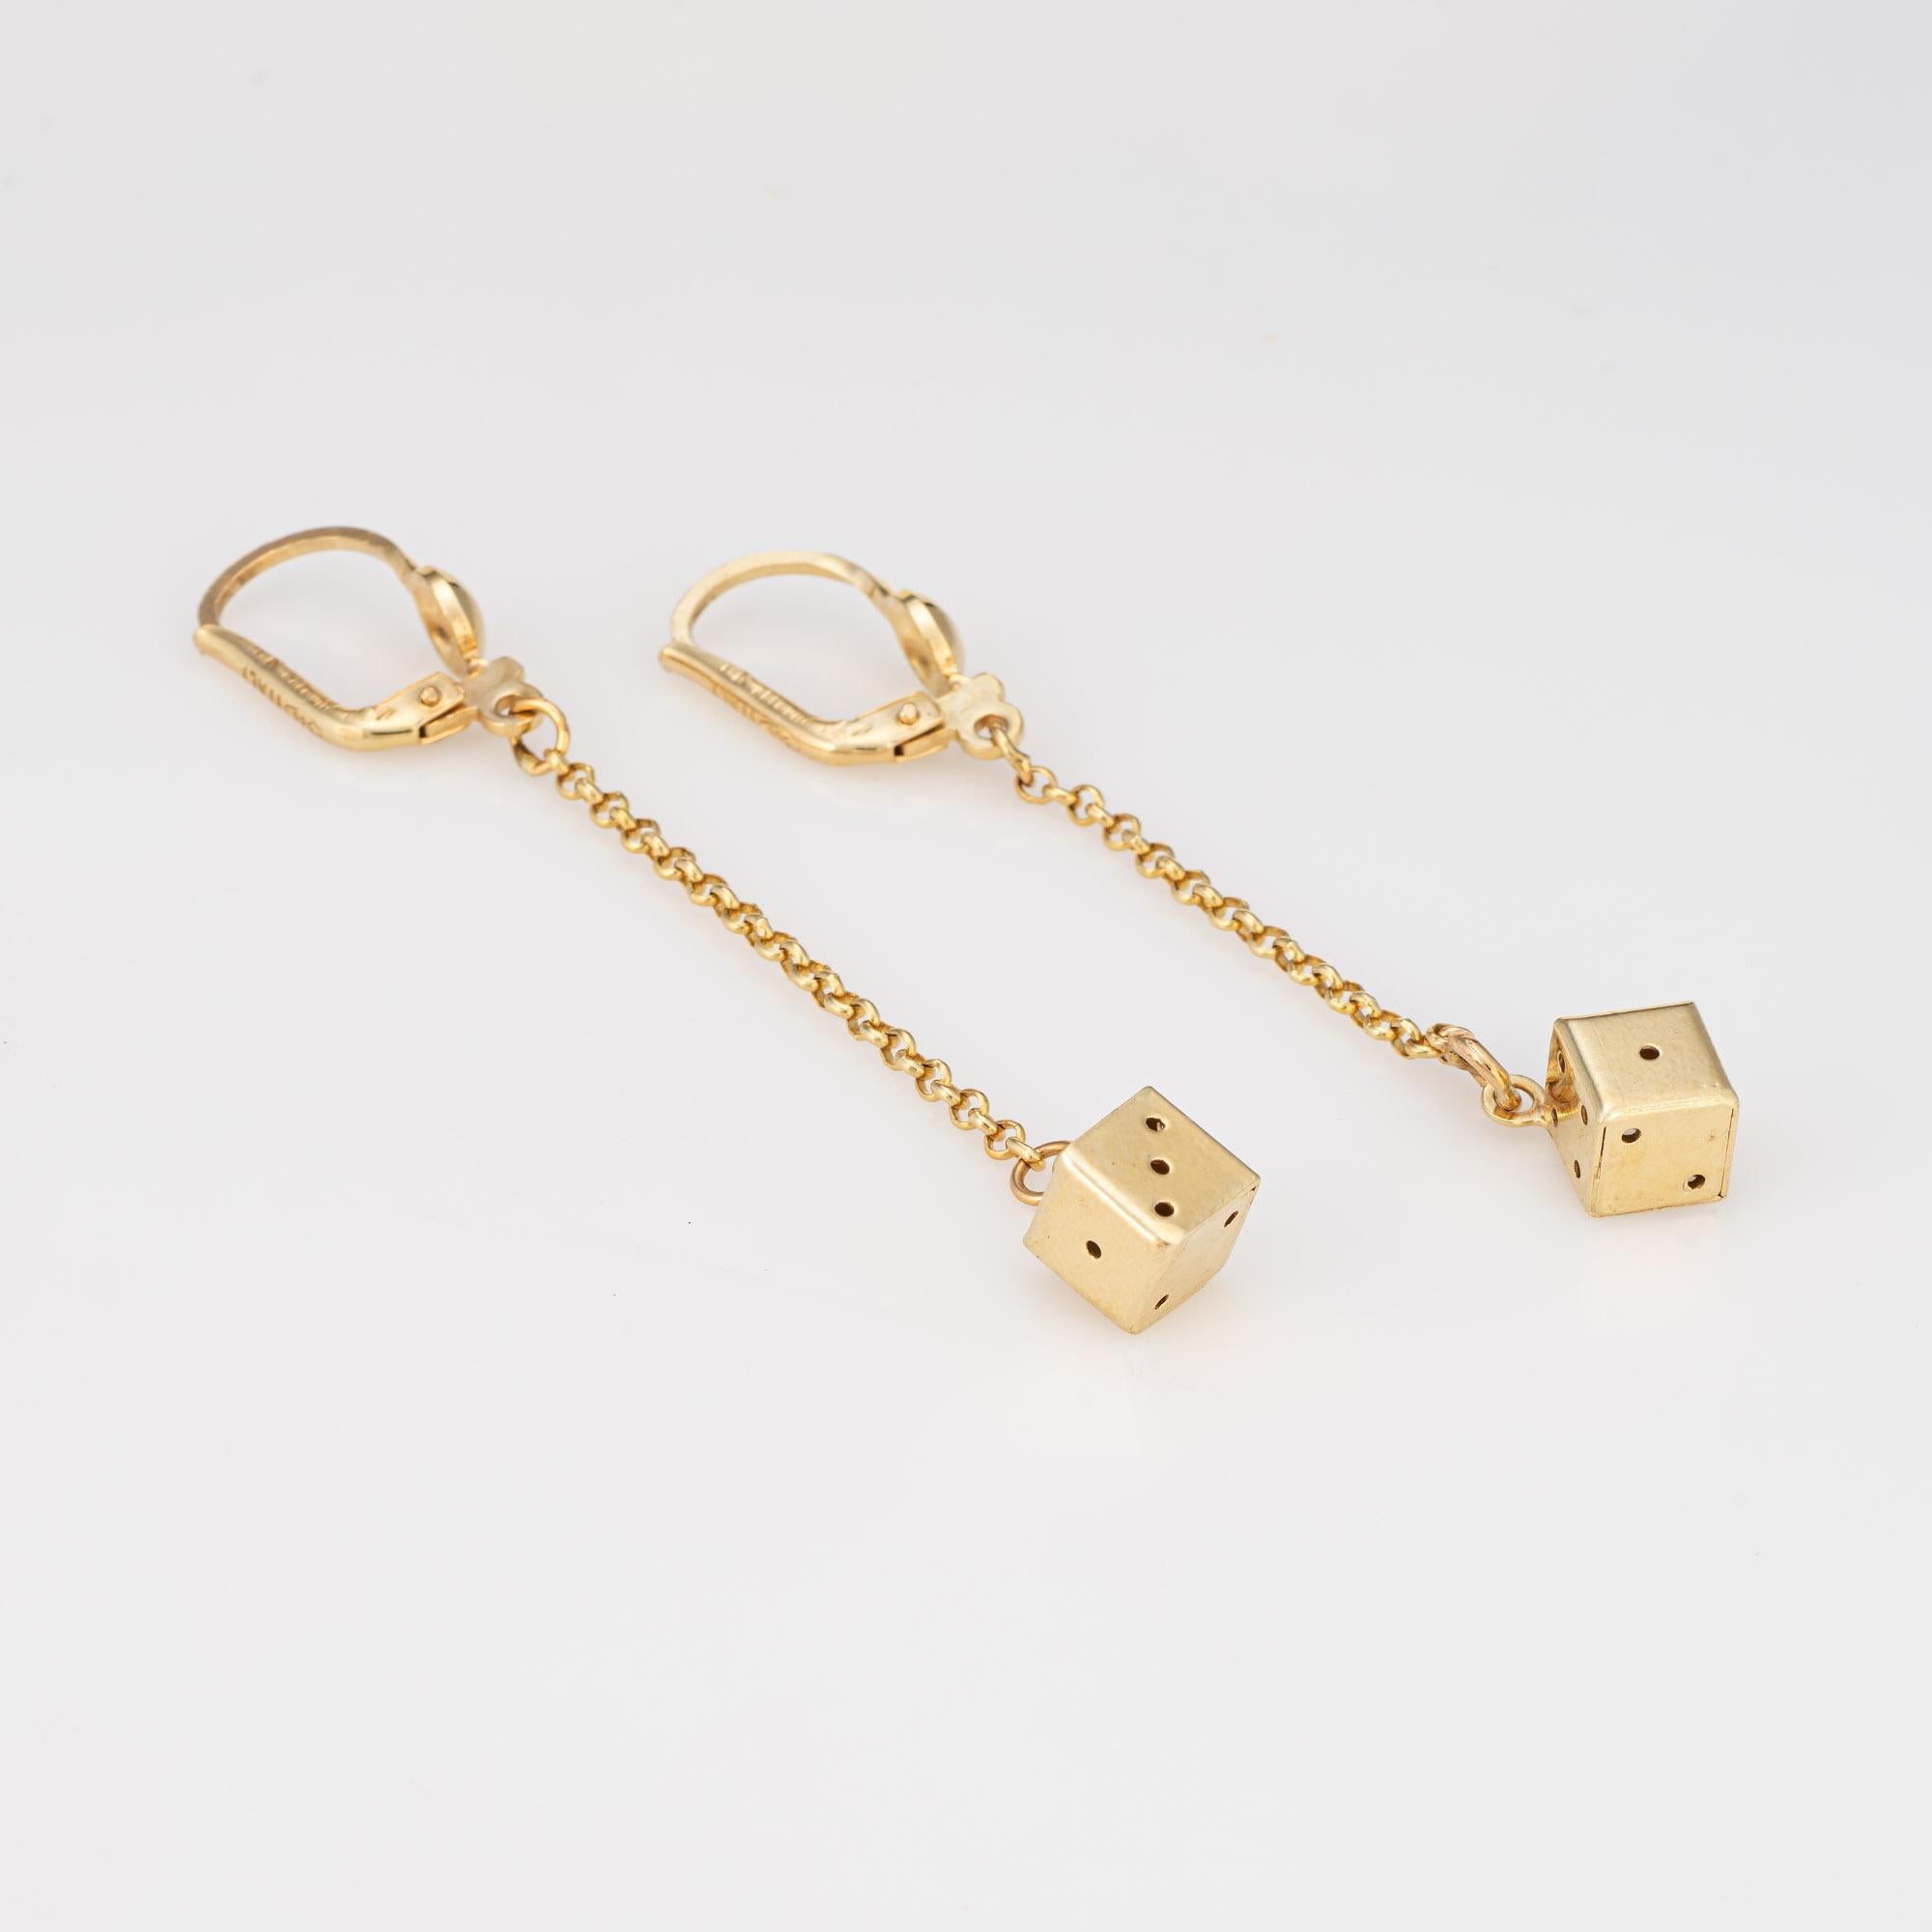 Finely detailed pair of gambling dice earrings crafted in 12k yellow gold. 

Small gambling dice adorns the base of the long 2 1/4 inch drops. Fitted with hook and lever backings for a secure fit on the earlobe. The earrings are great for day or